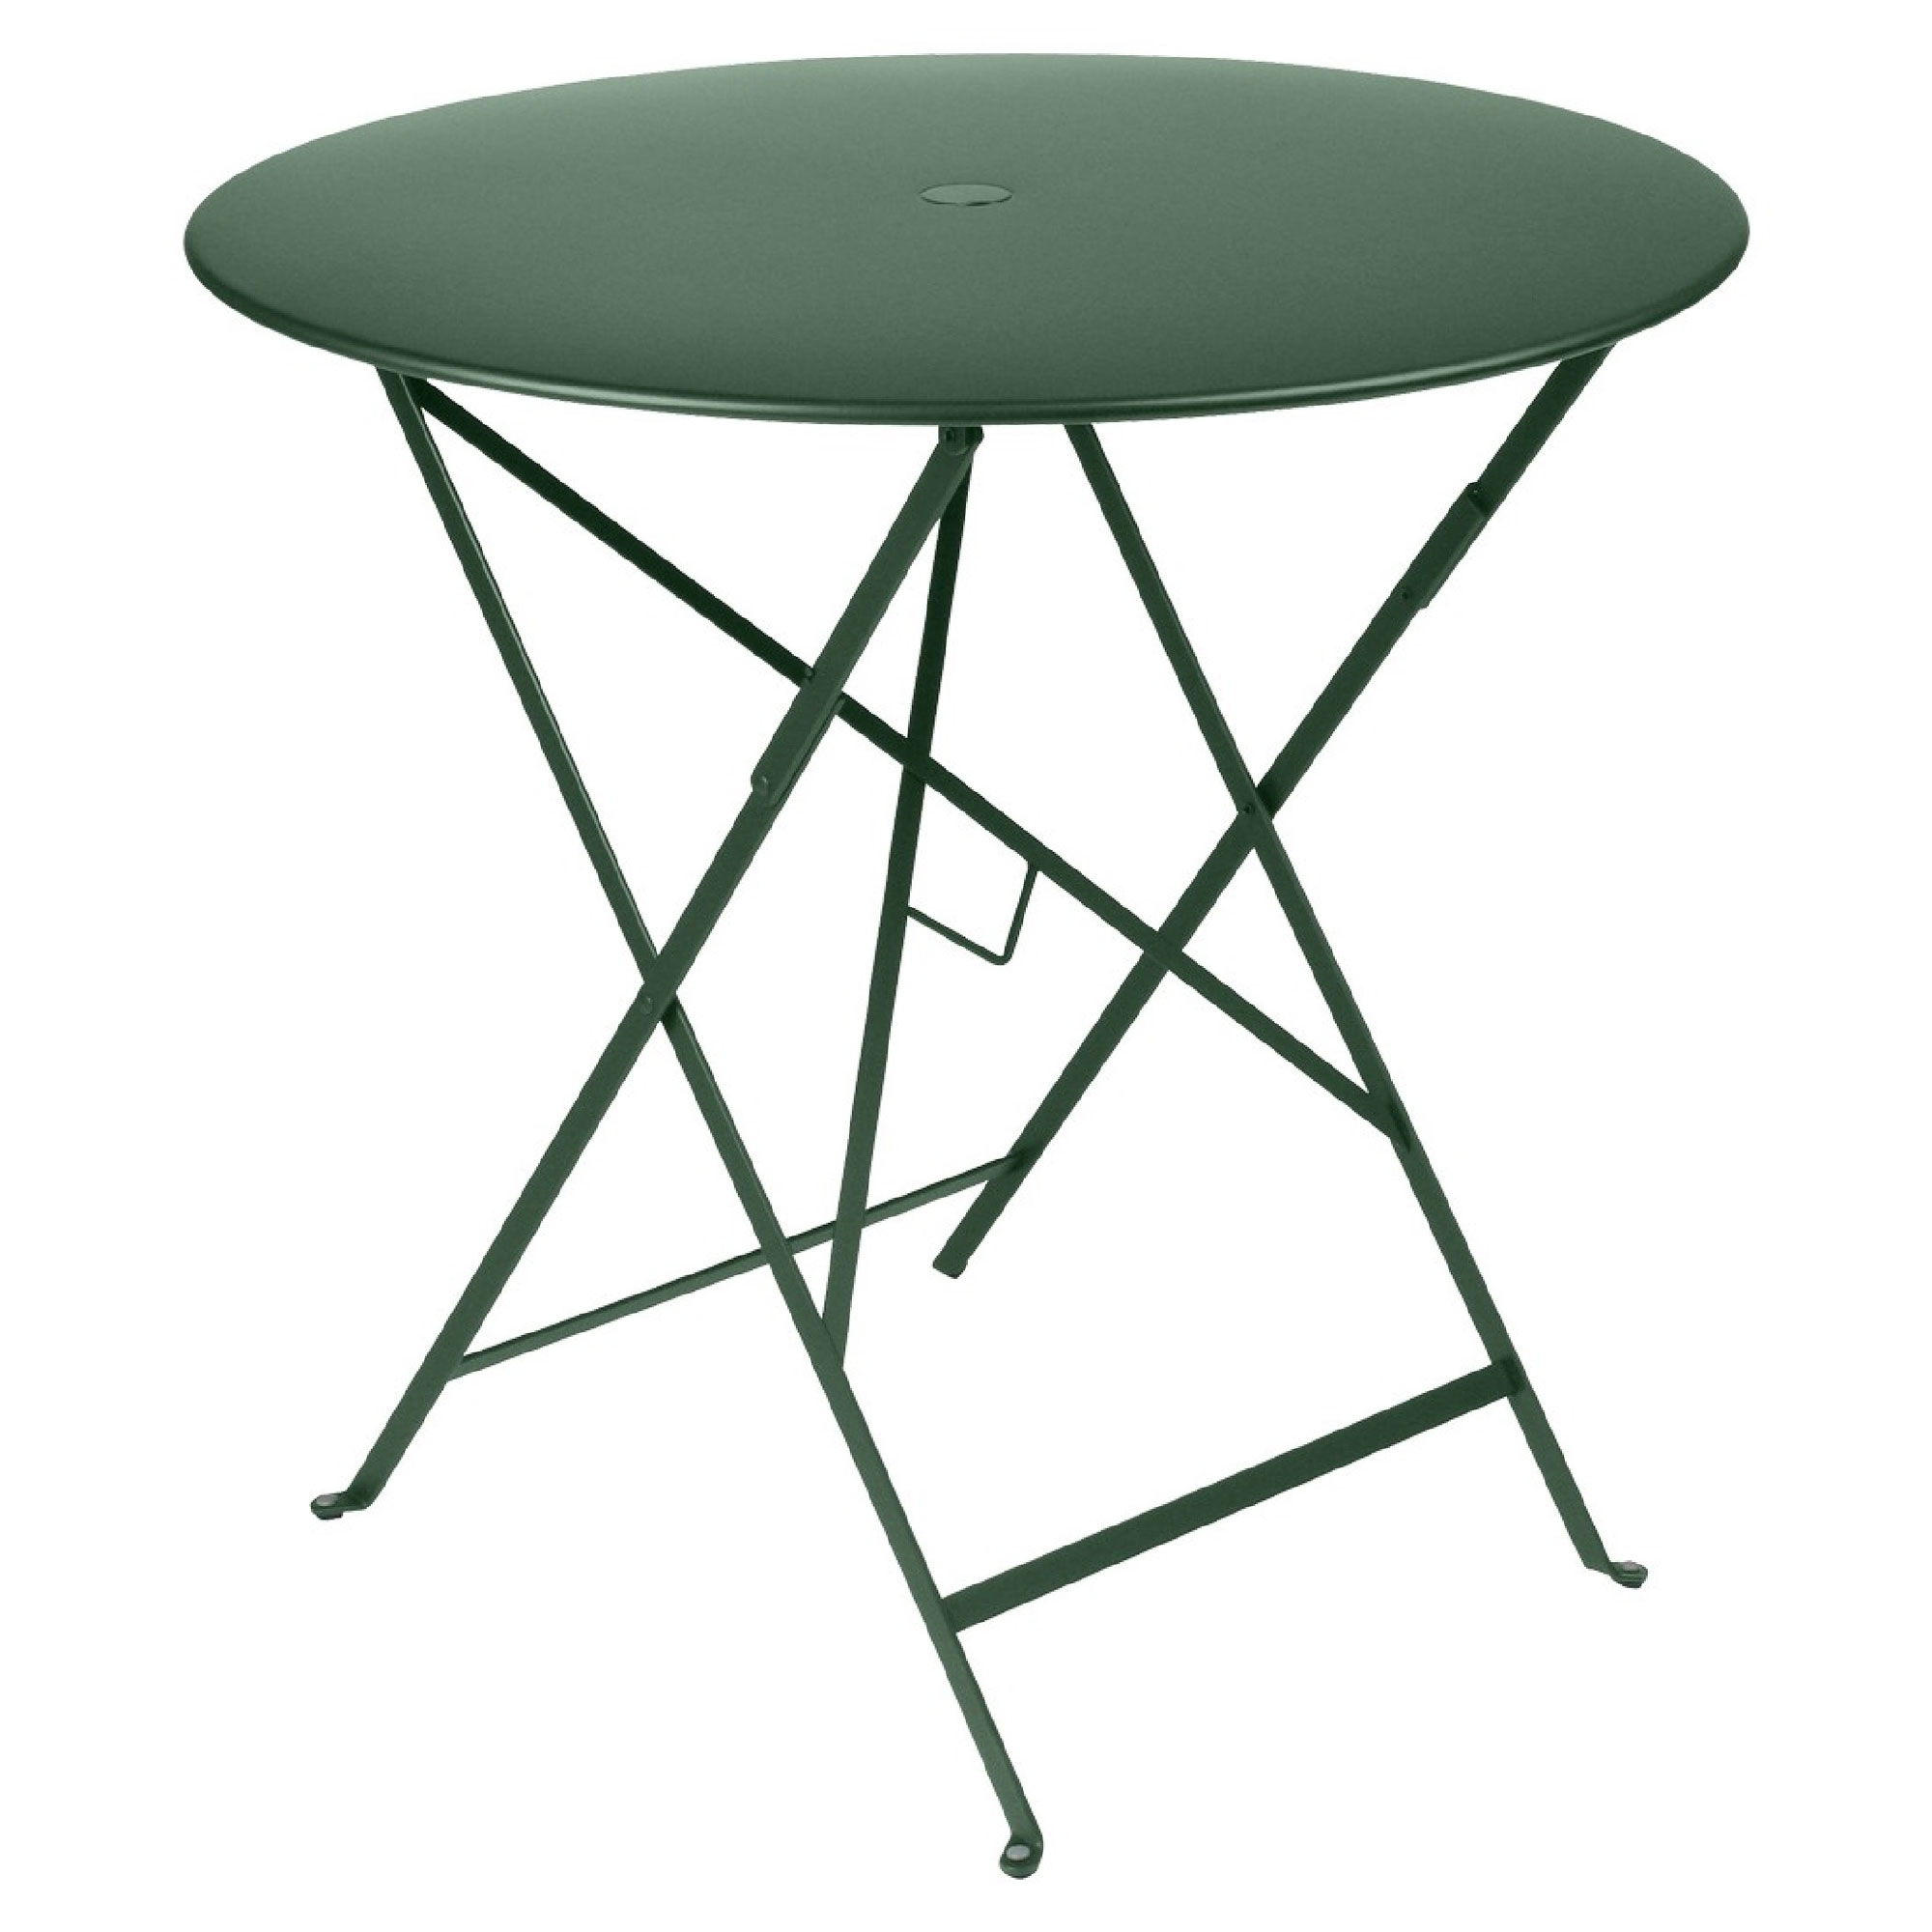 Bistro Round Folding Table by Fermob | FMB-023302 | FMB1203731